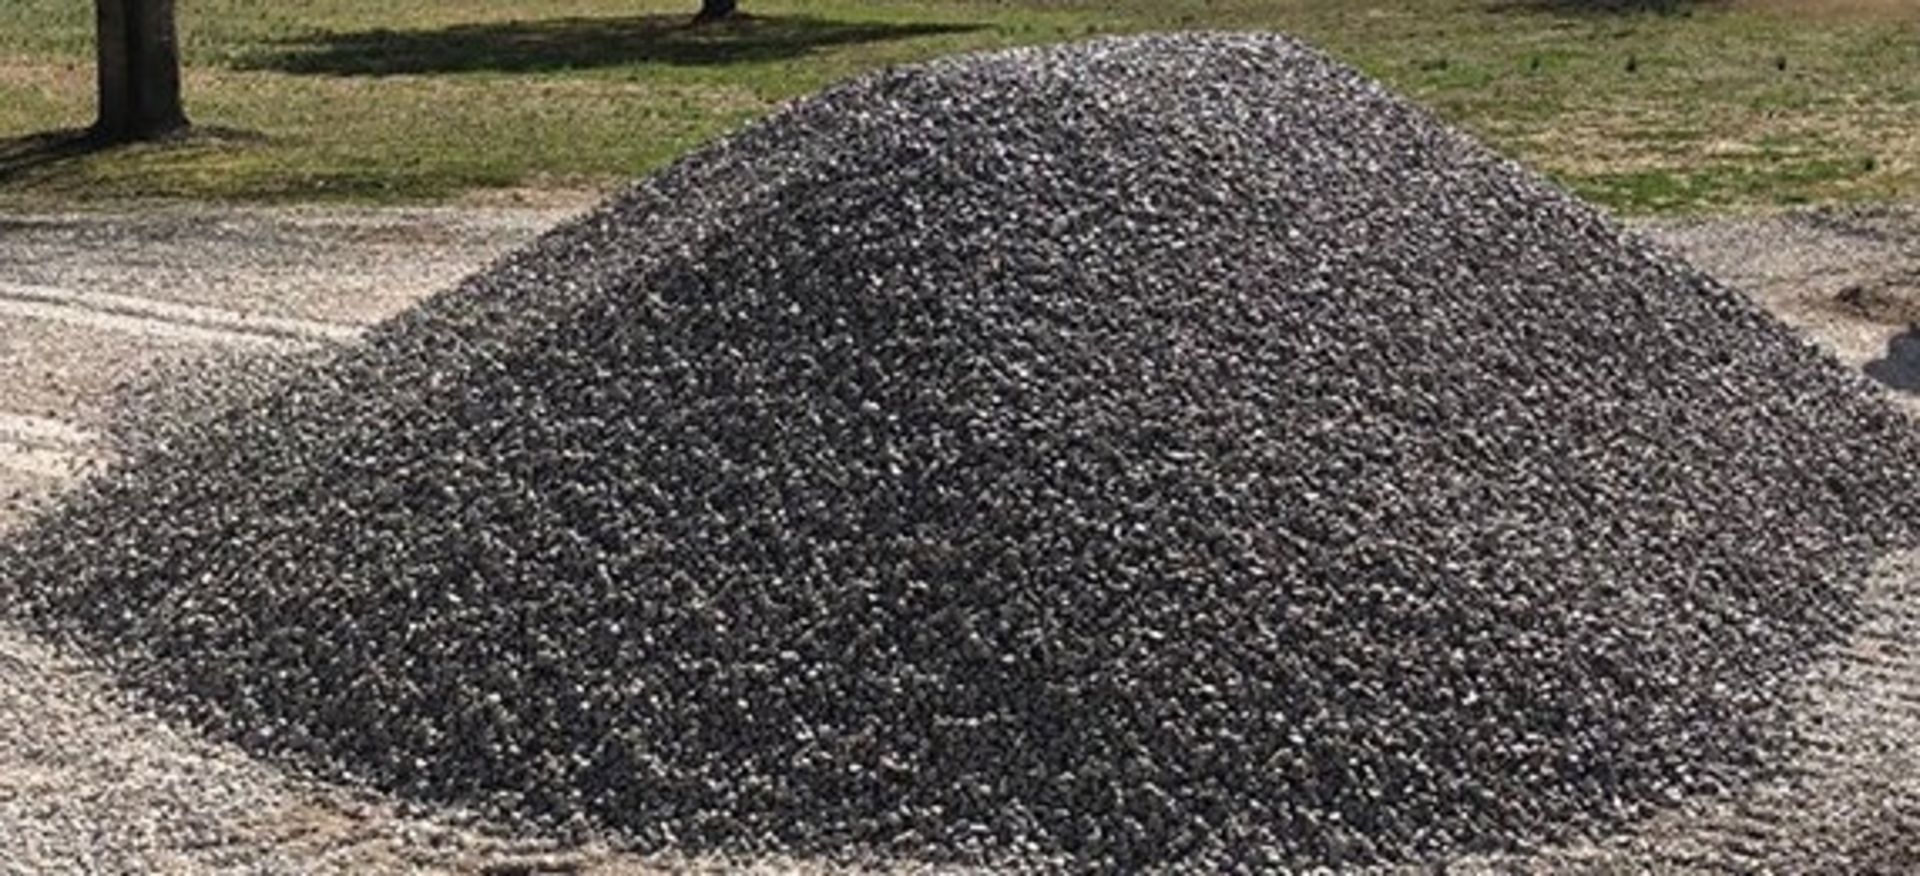 6 Yards of 3/4" Crushed Gravel Delivered In 10km Proximity to Lacombe - Donated By: D&M Concrete, - Image 2 of 2